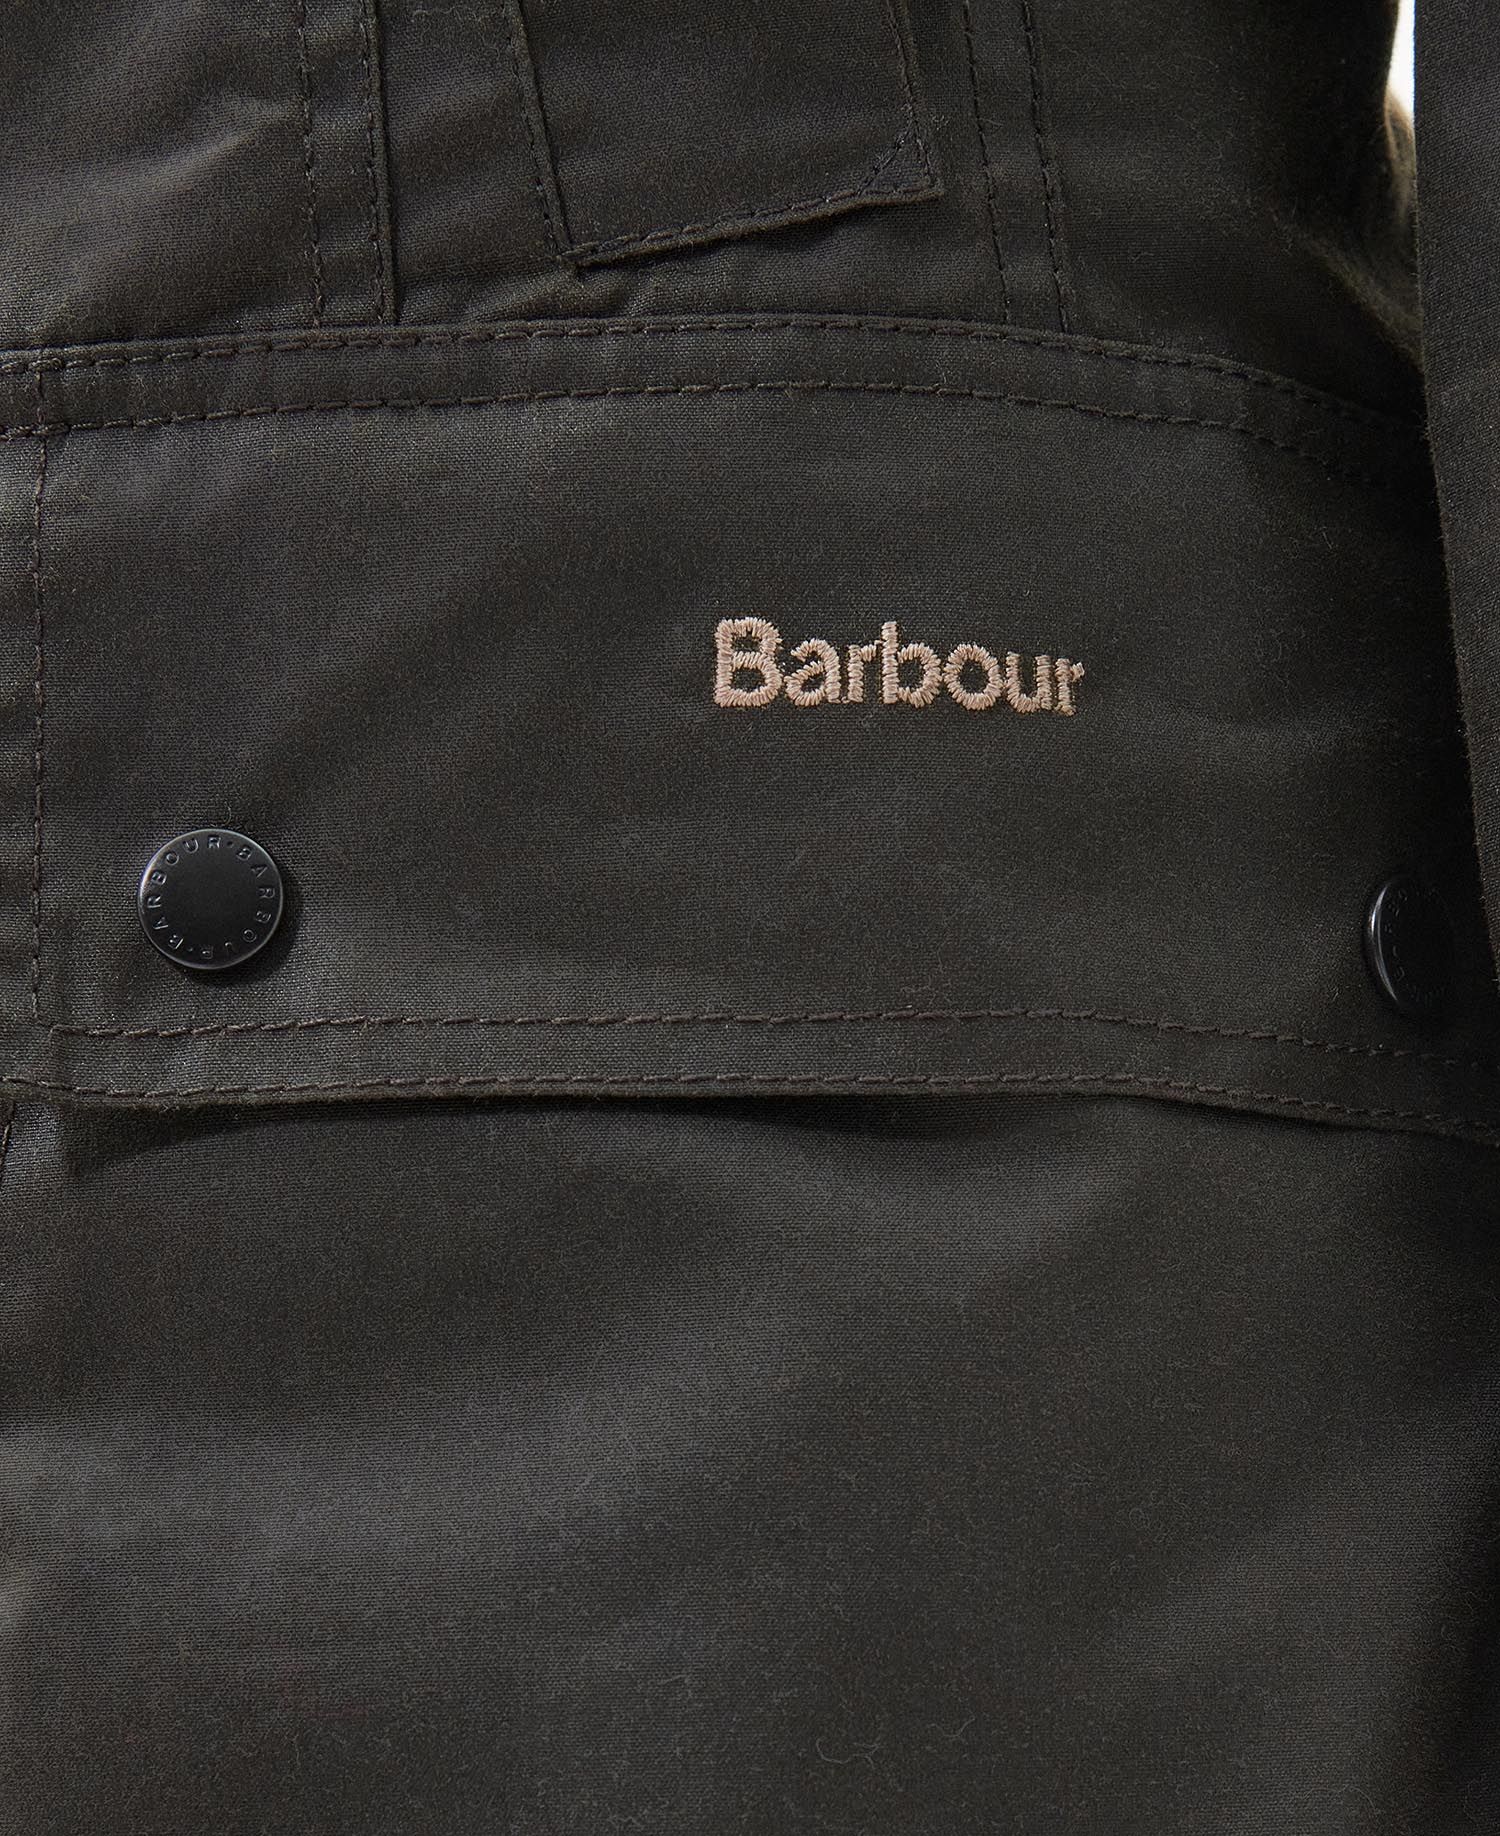 Shop the Barbour Union Jack Beadnell Wax Jacket today. | Barbour